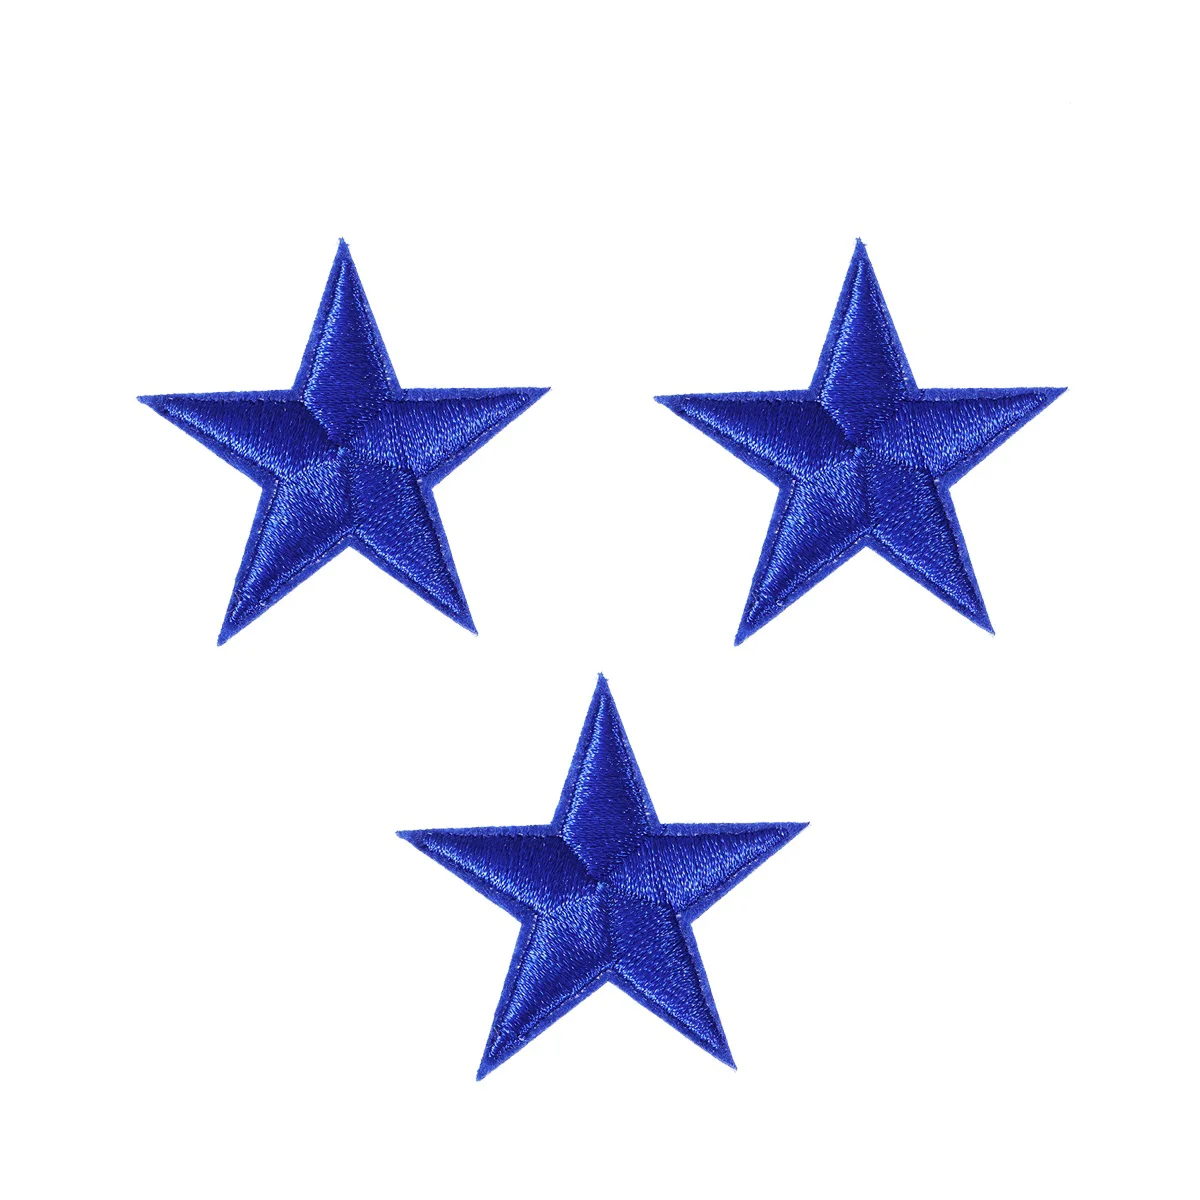 

Patch Star Patches Clothing Iron Embroidery Applique Sticker Diy Sew Embroidered Sewing Clothes Stars Pentagram Gold Appliques